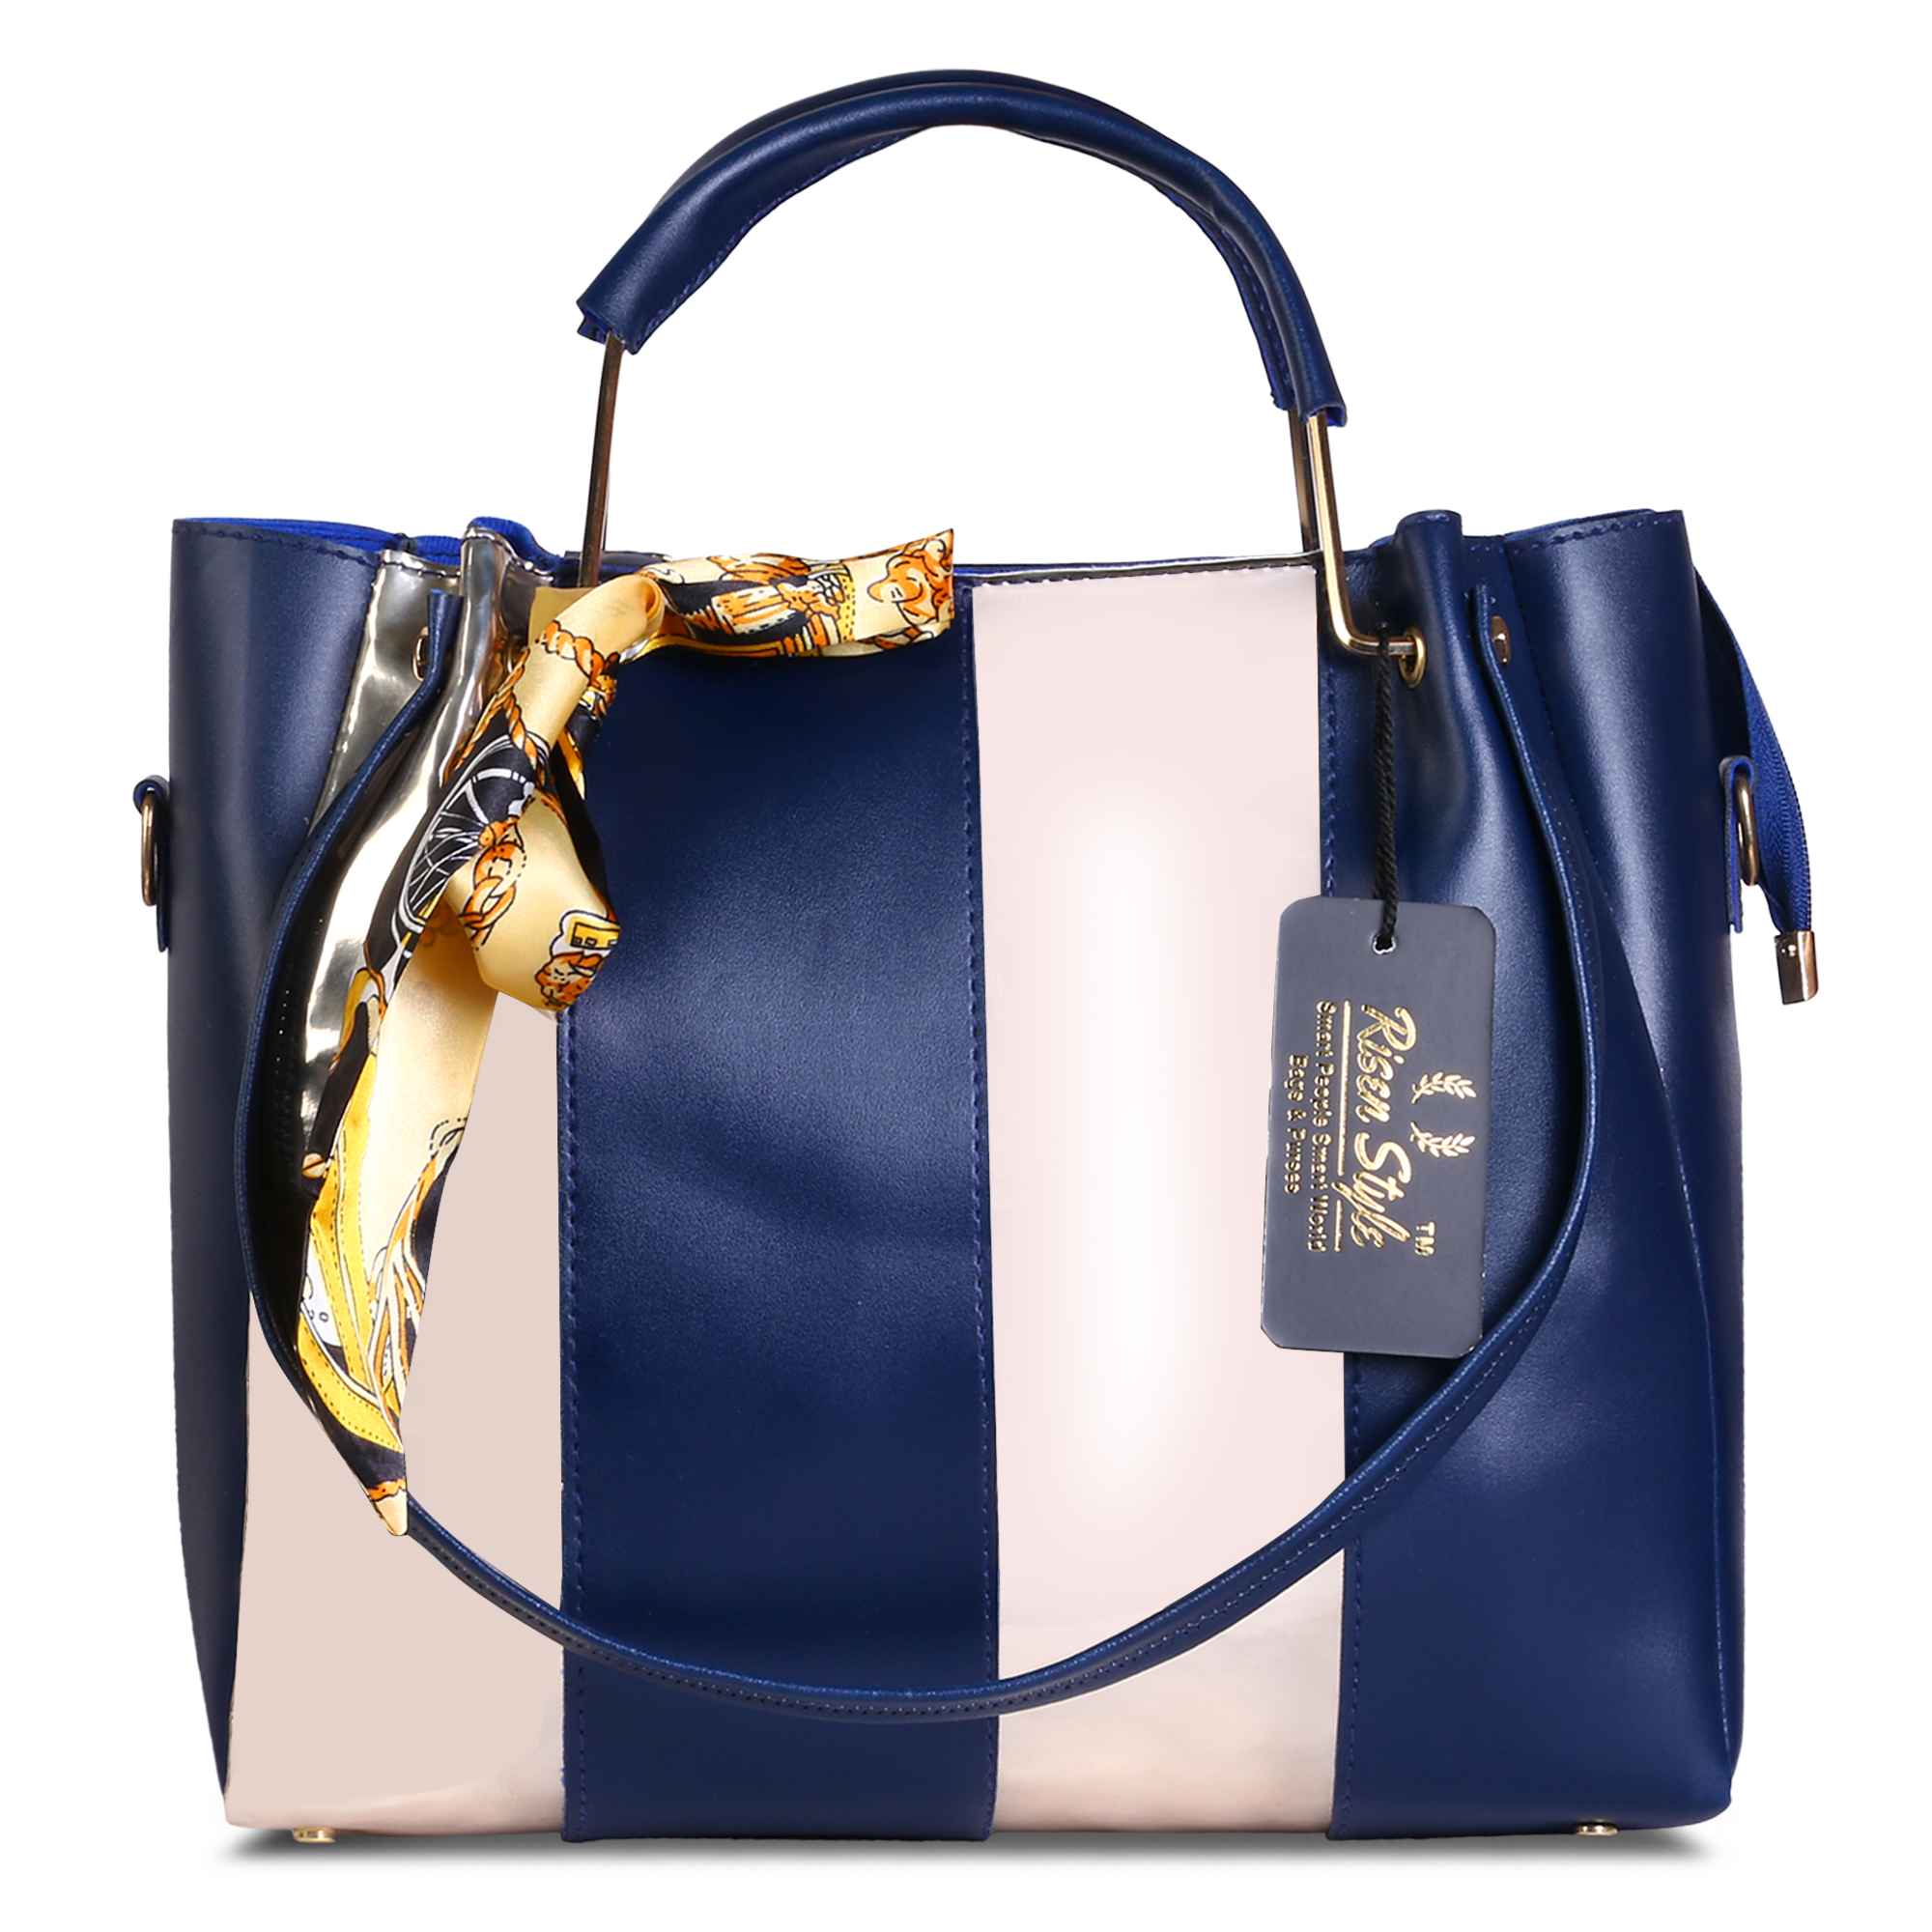 Blue and Cream Hand Bag Collection